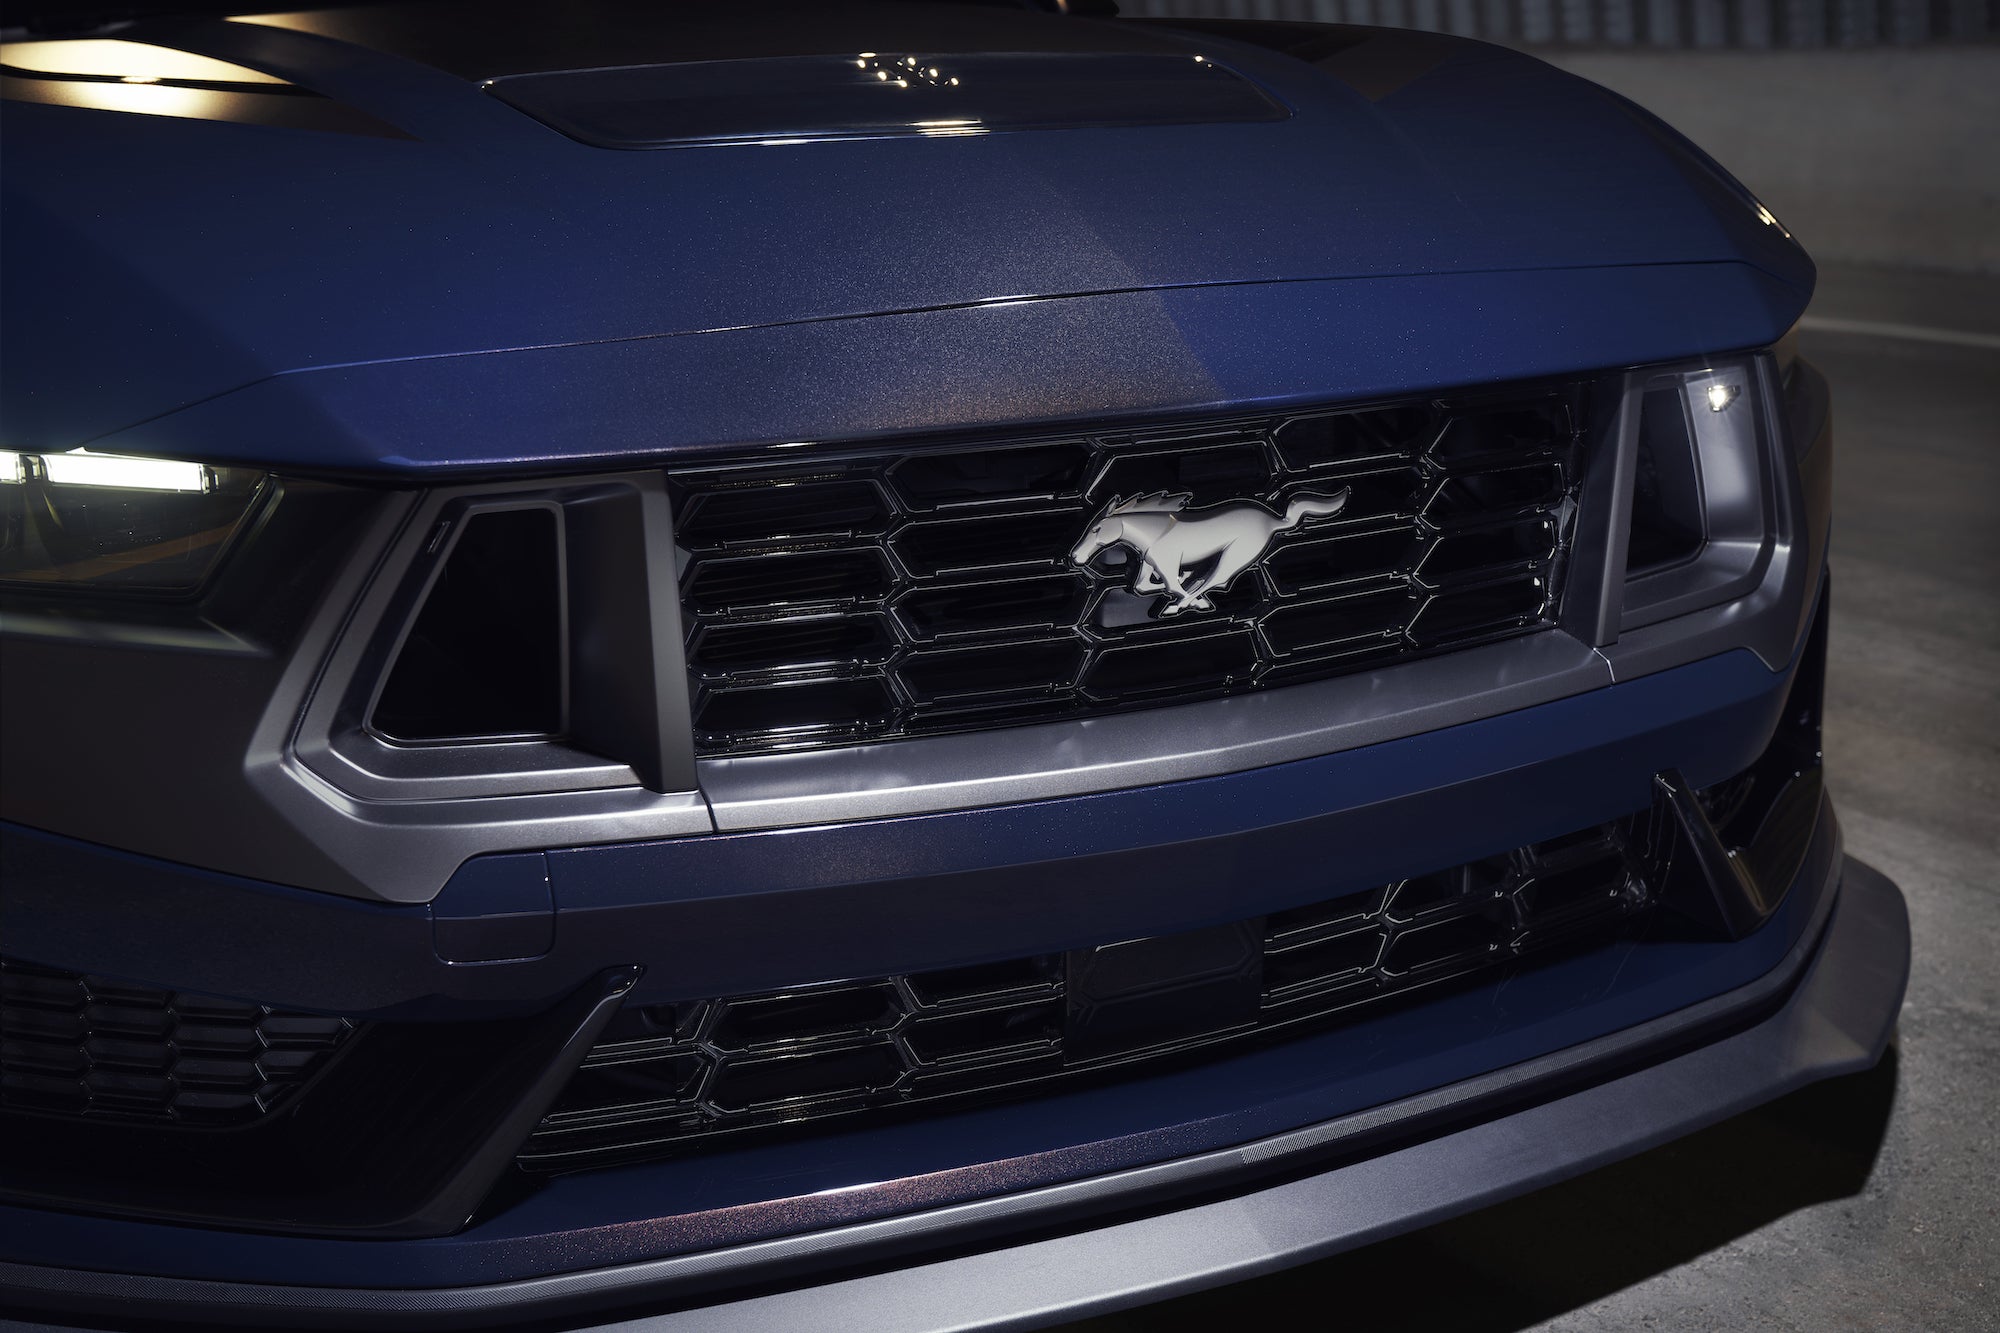 Ford turbocharged its seventh-generation Mustang with new tech